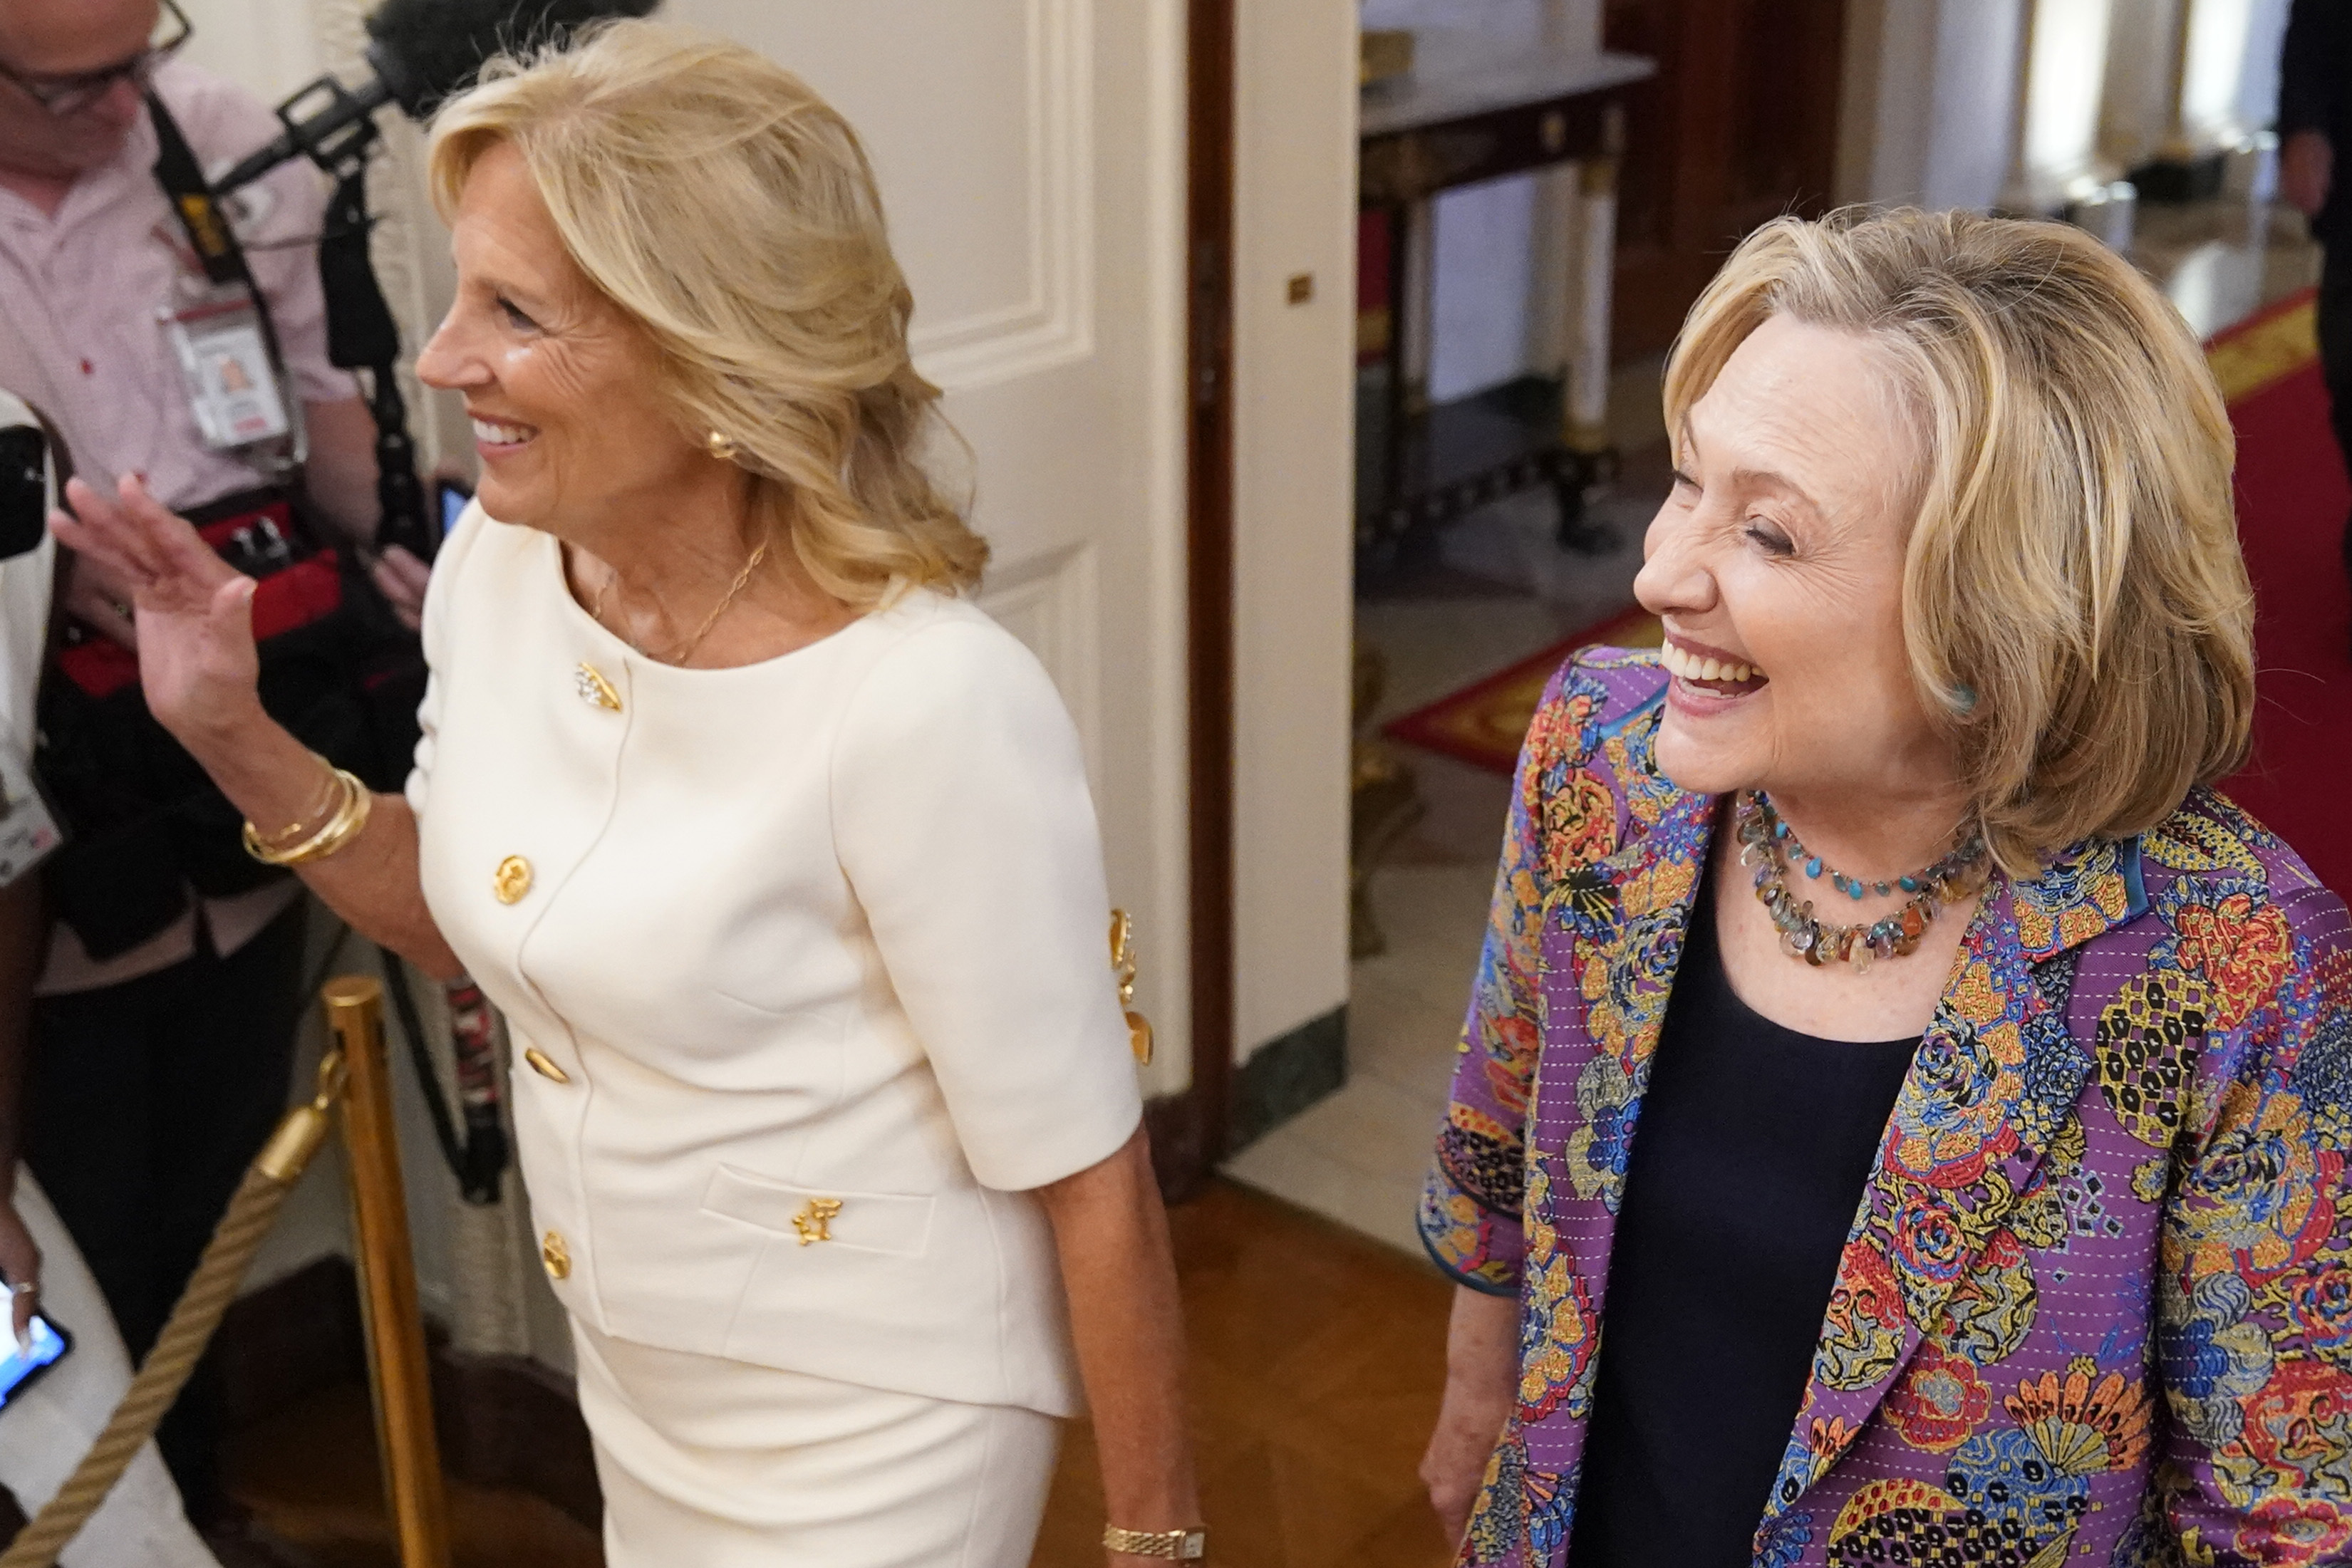 Hillary Clinton returning to the White House for an arts event